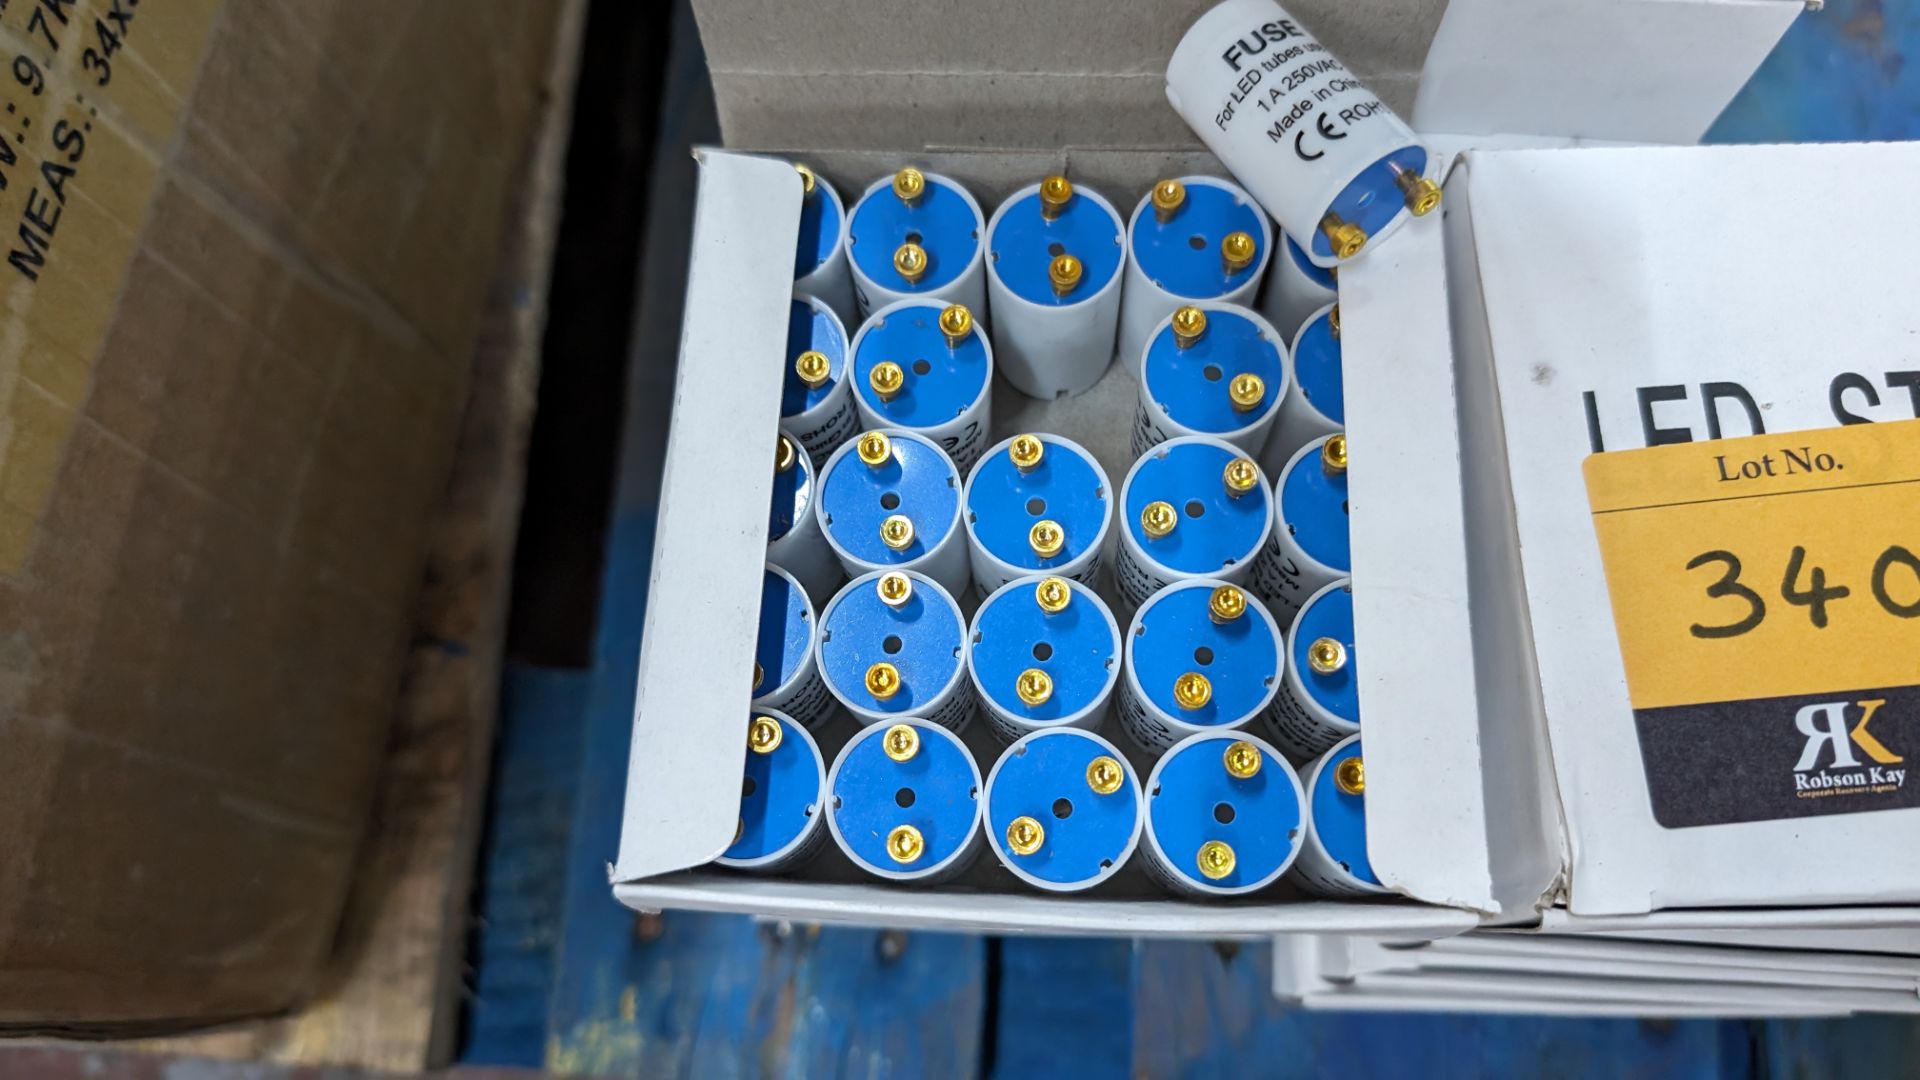 300 off LED starter fuses - 8 boxes - Image 3 of 4